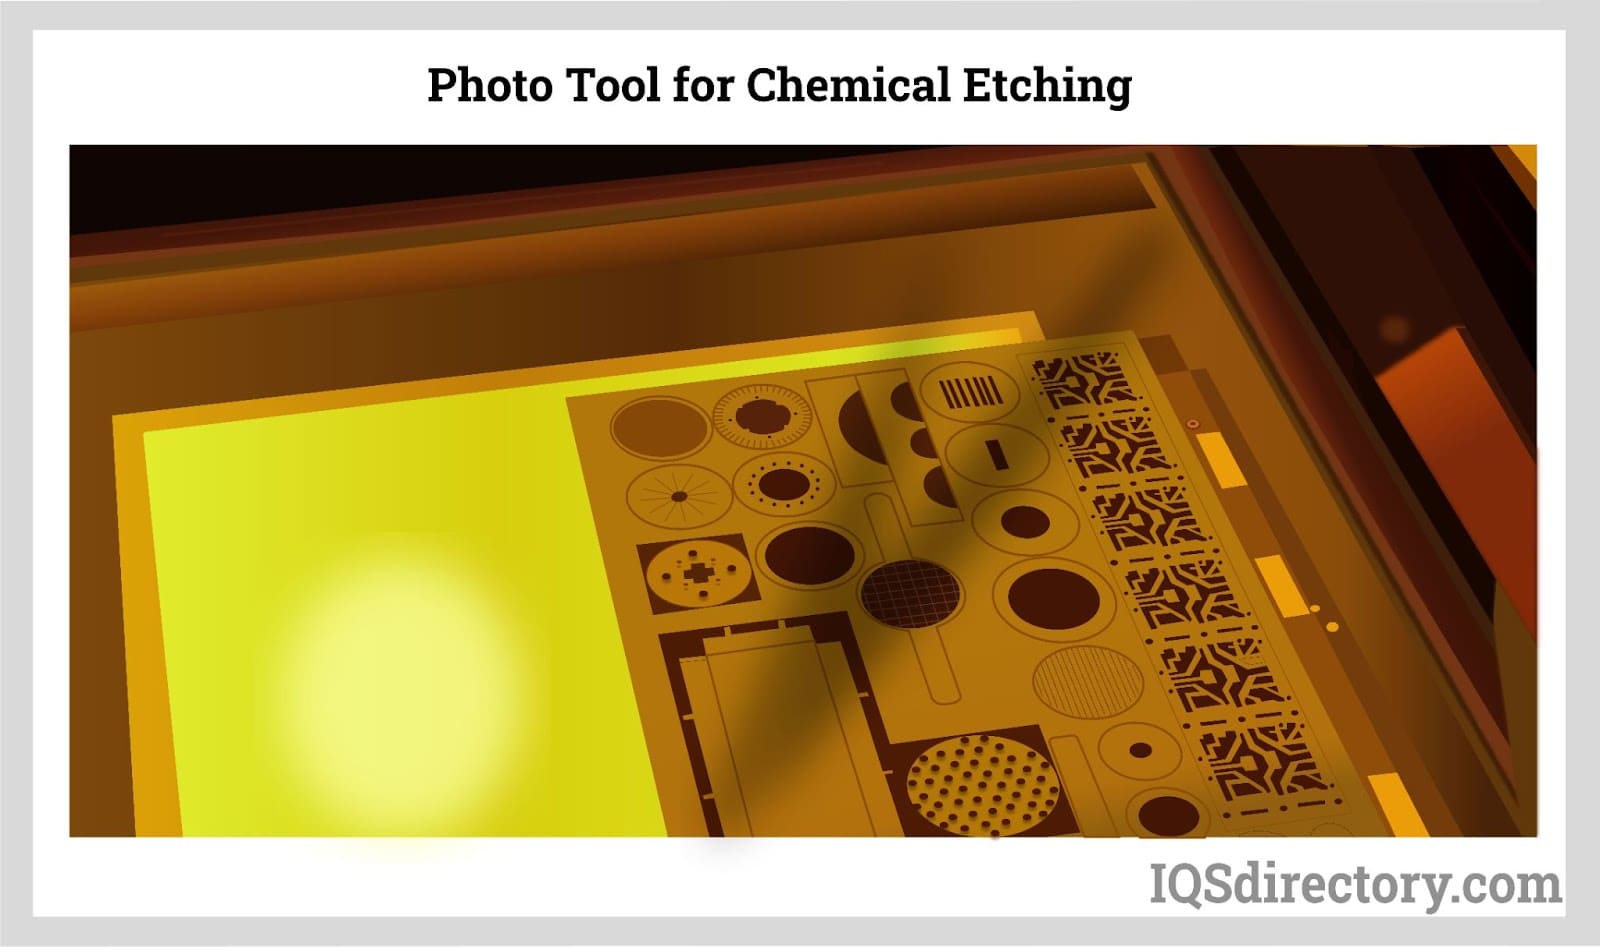 photo tool for chemical etching